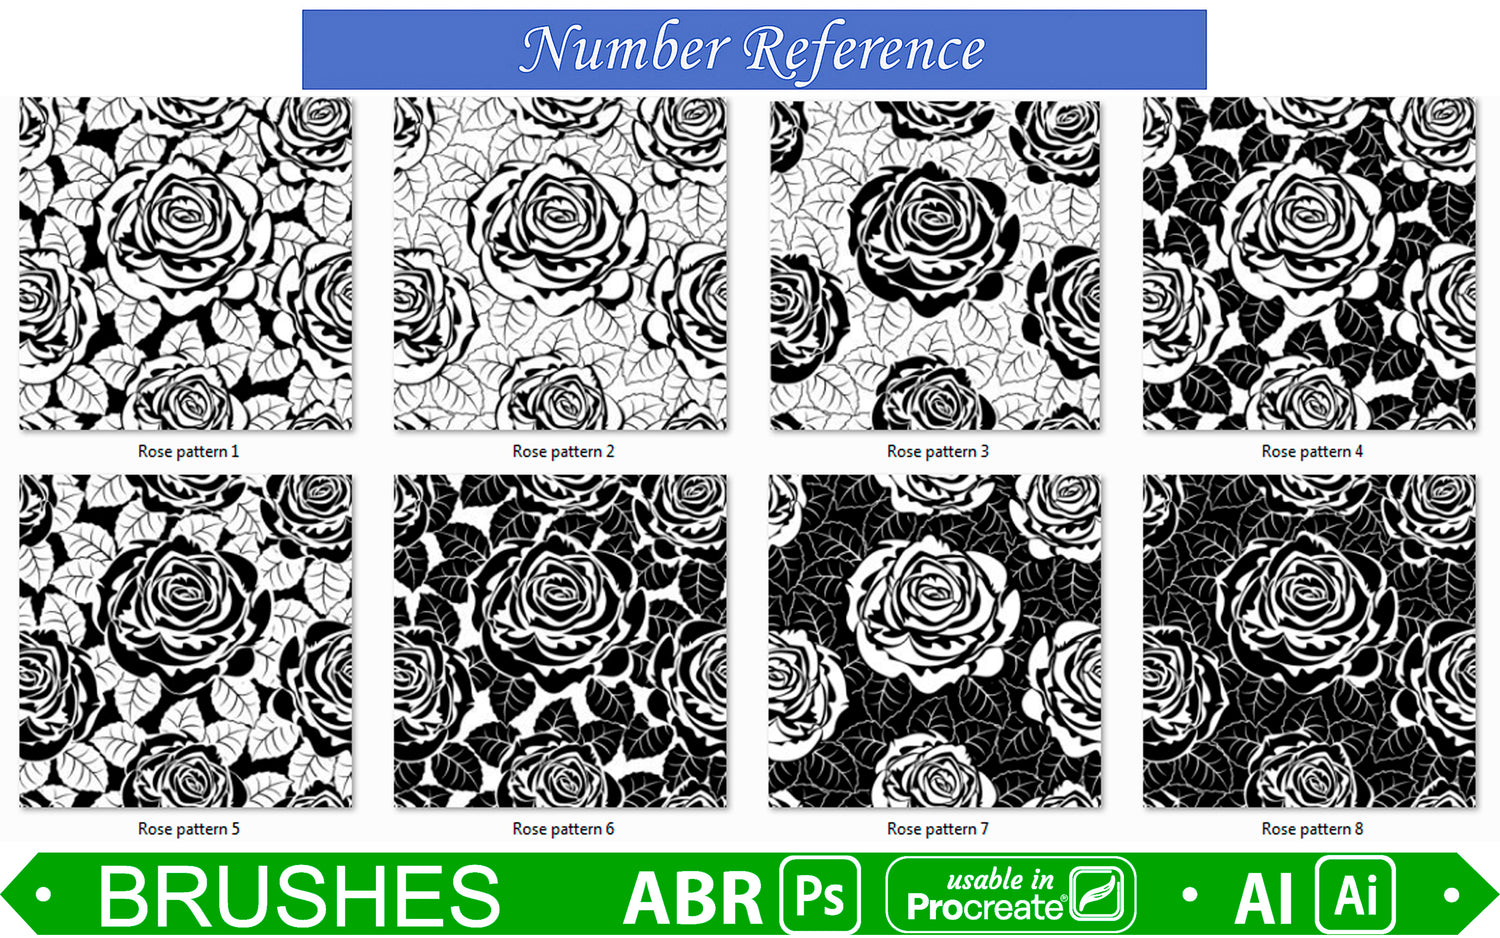 8 Seamless Floral Rose Pattern brushes for Photoshop ( Usable in Procreate 5 ) and Illustrator